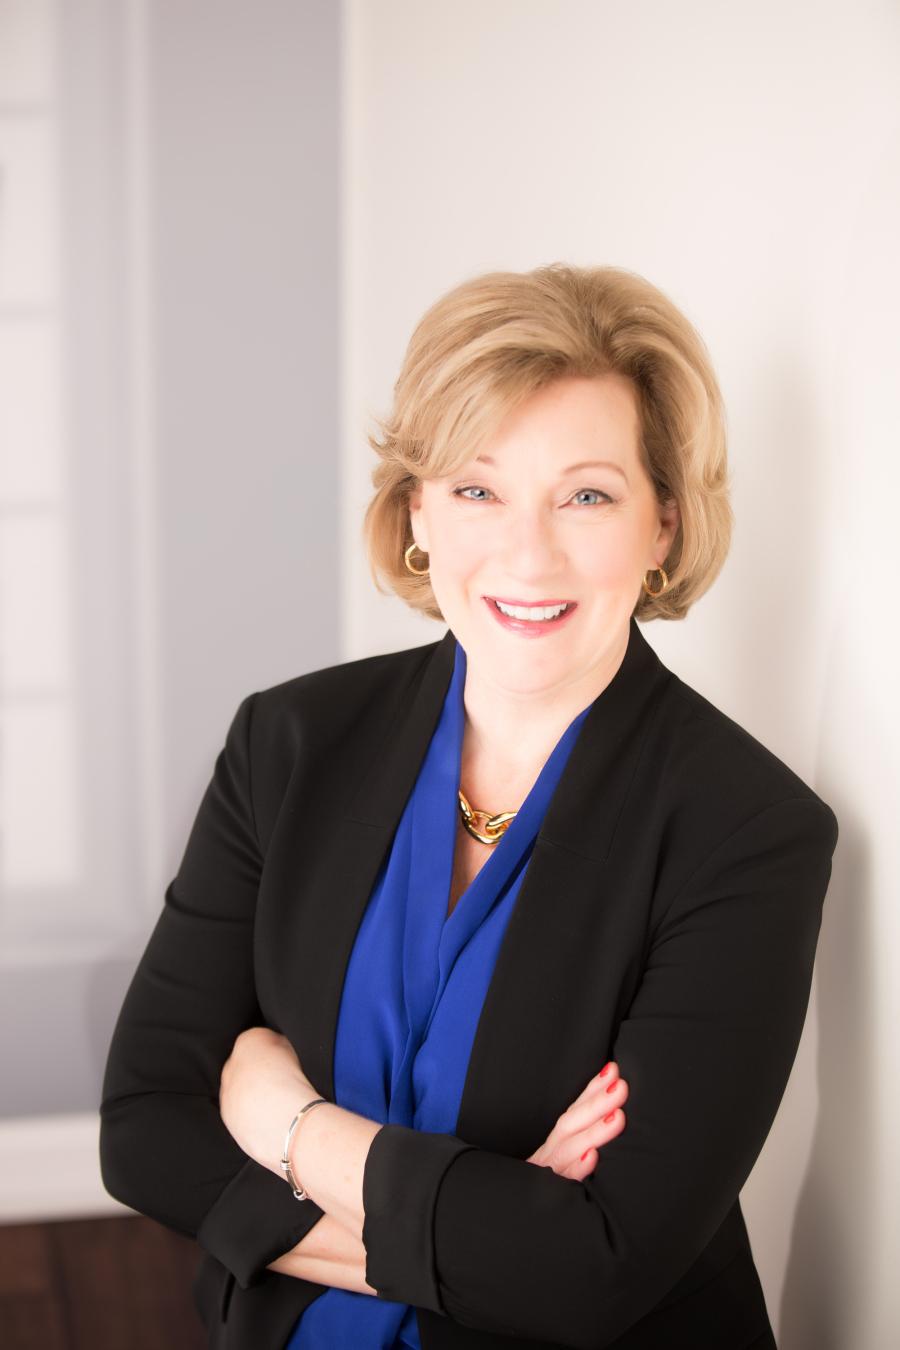 The National Association of Women in Construction (NAWIC) announced Sept. 28, the hiring of its new Executive Vice President Beth Brooks, CAE. Brooks is a respected association professional and advisor on governance, board orientation and strategic planning.